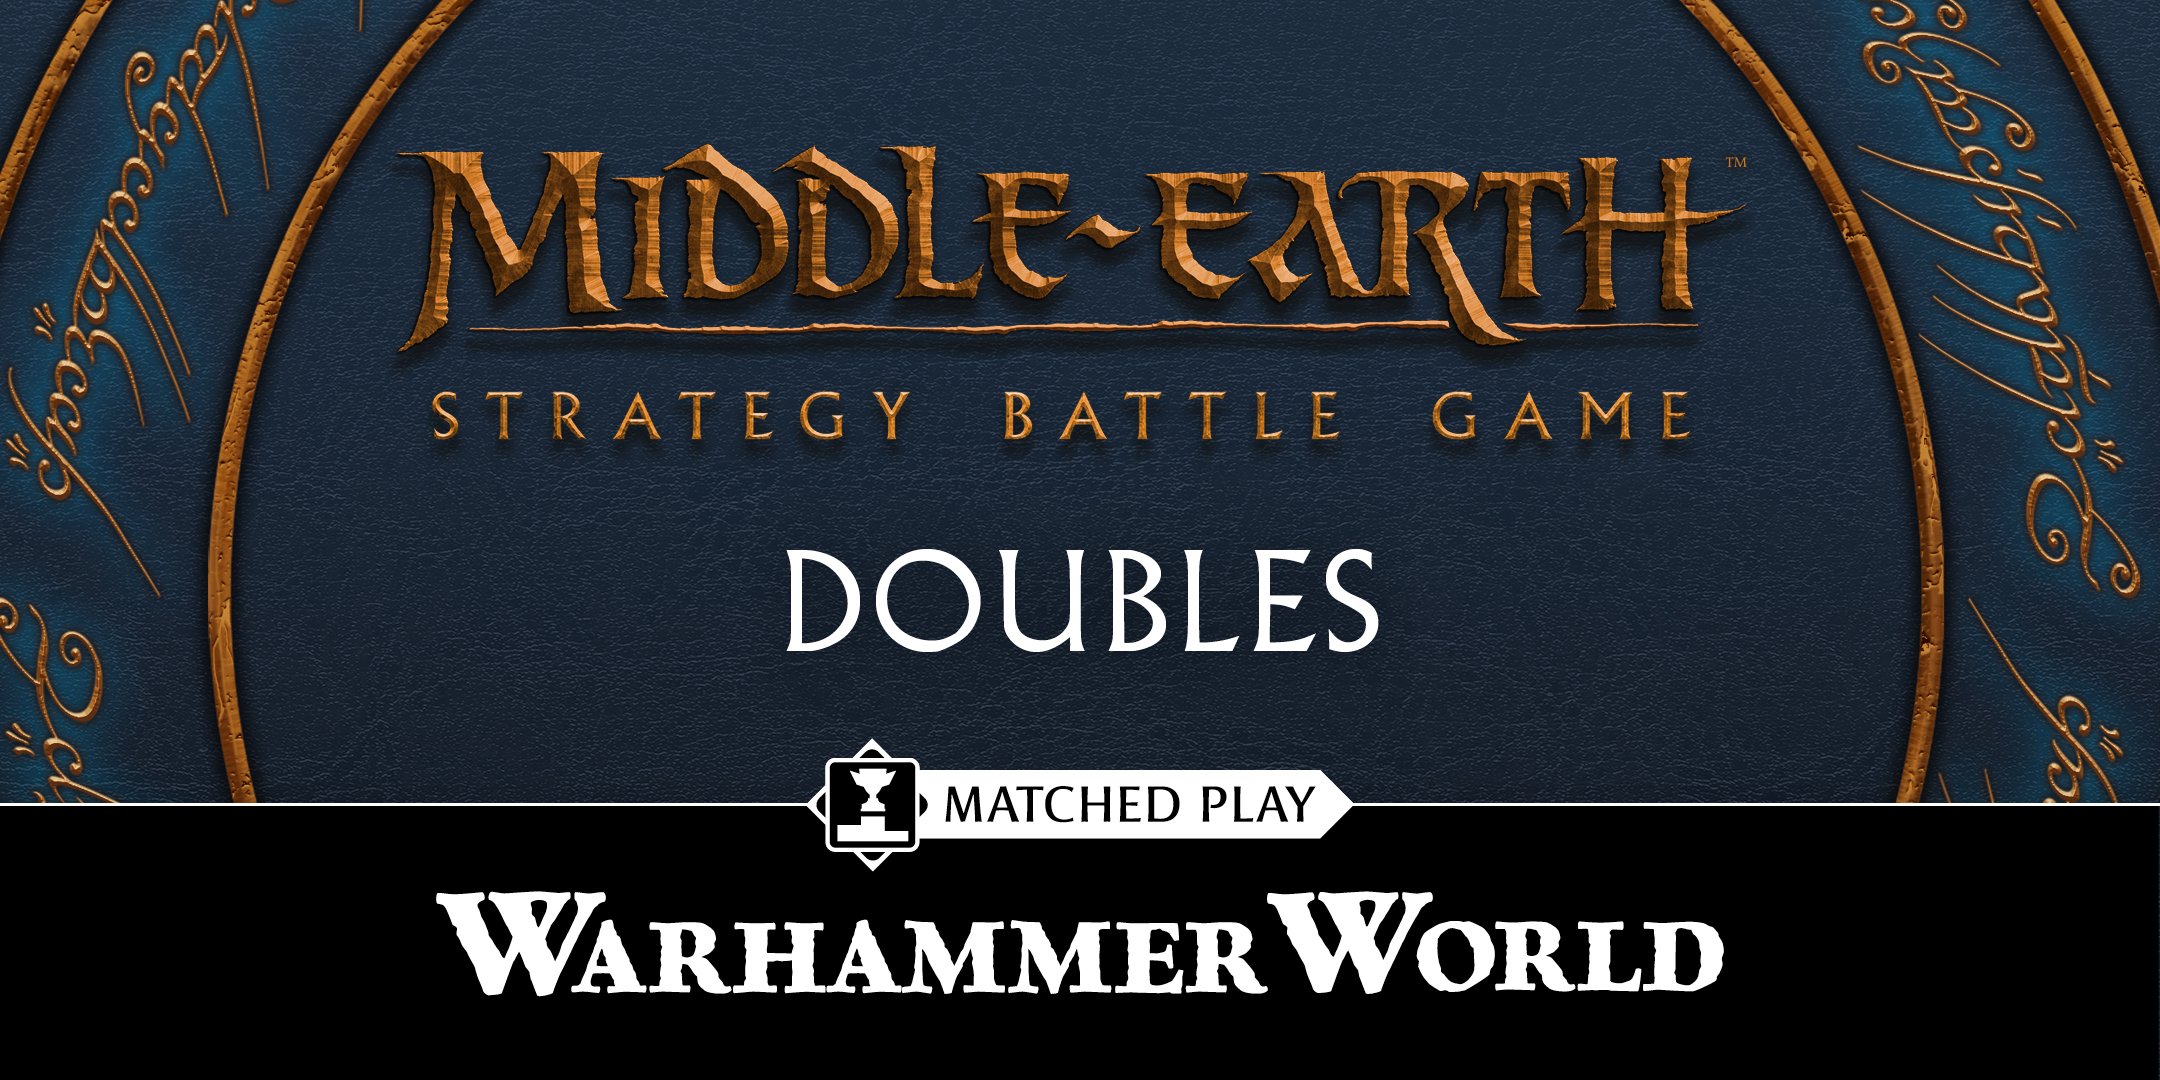 Middle-earth Doubles